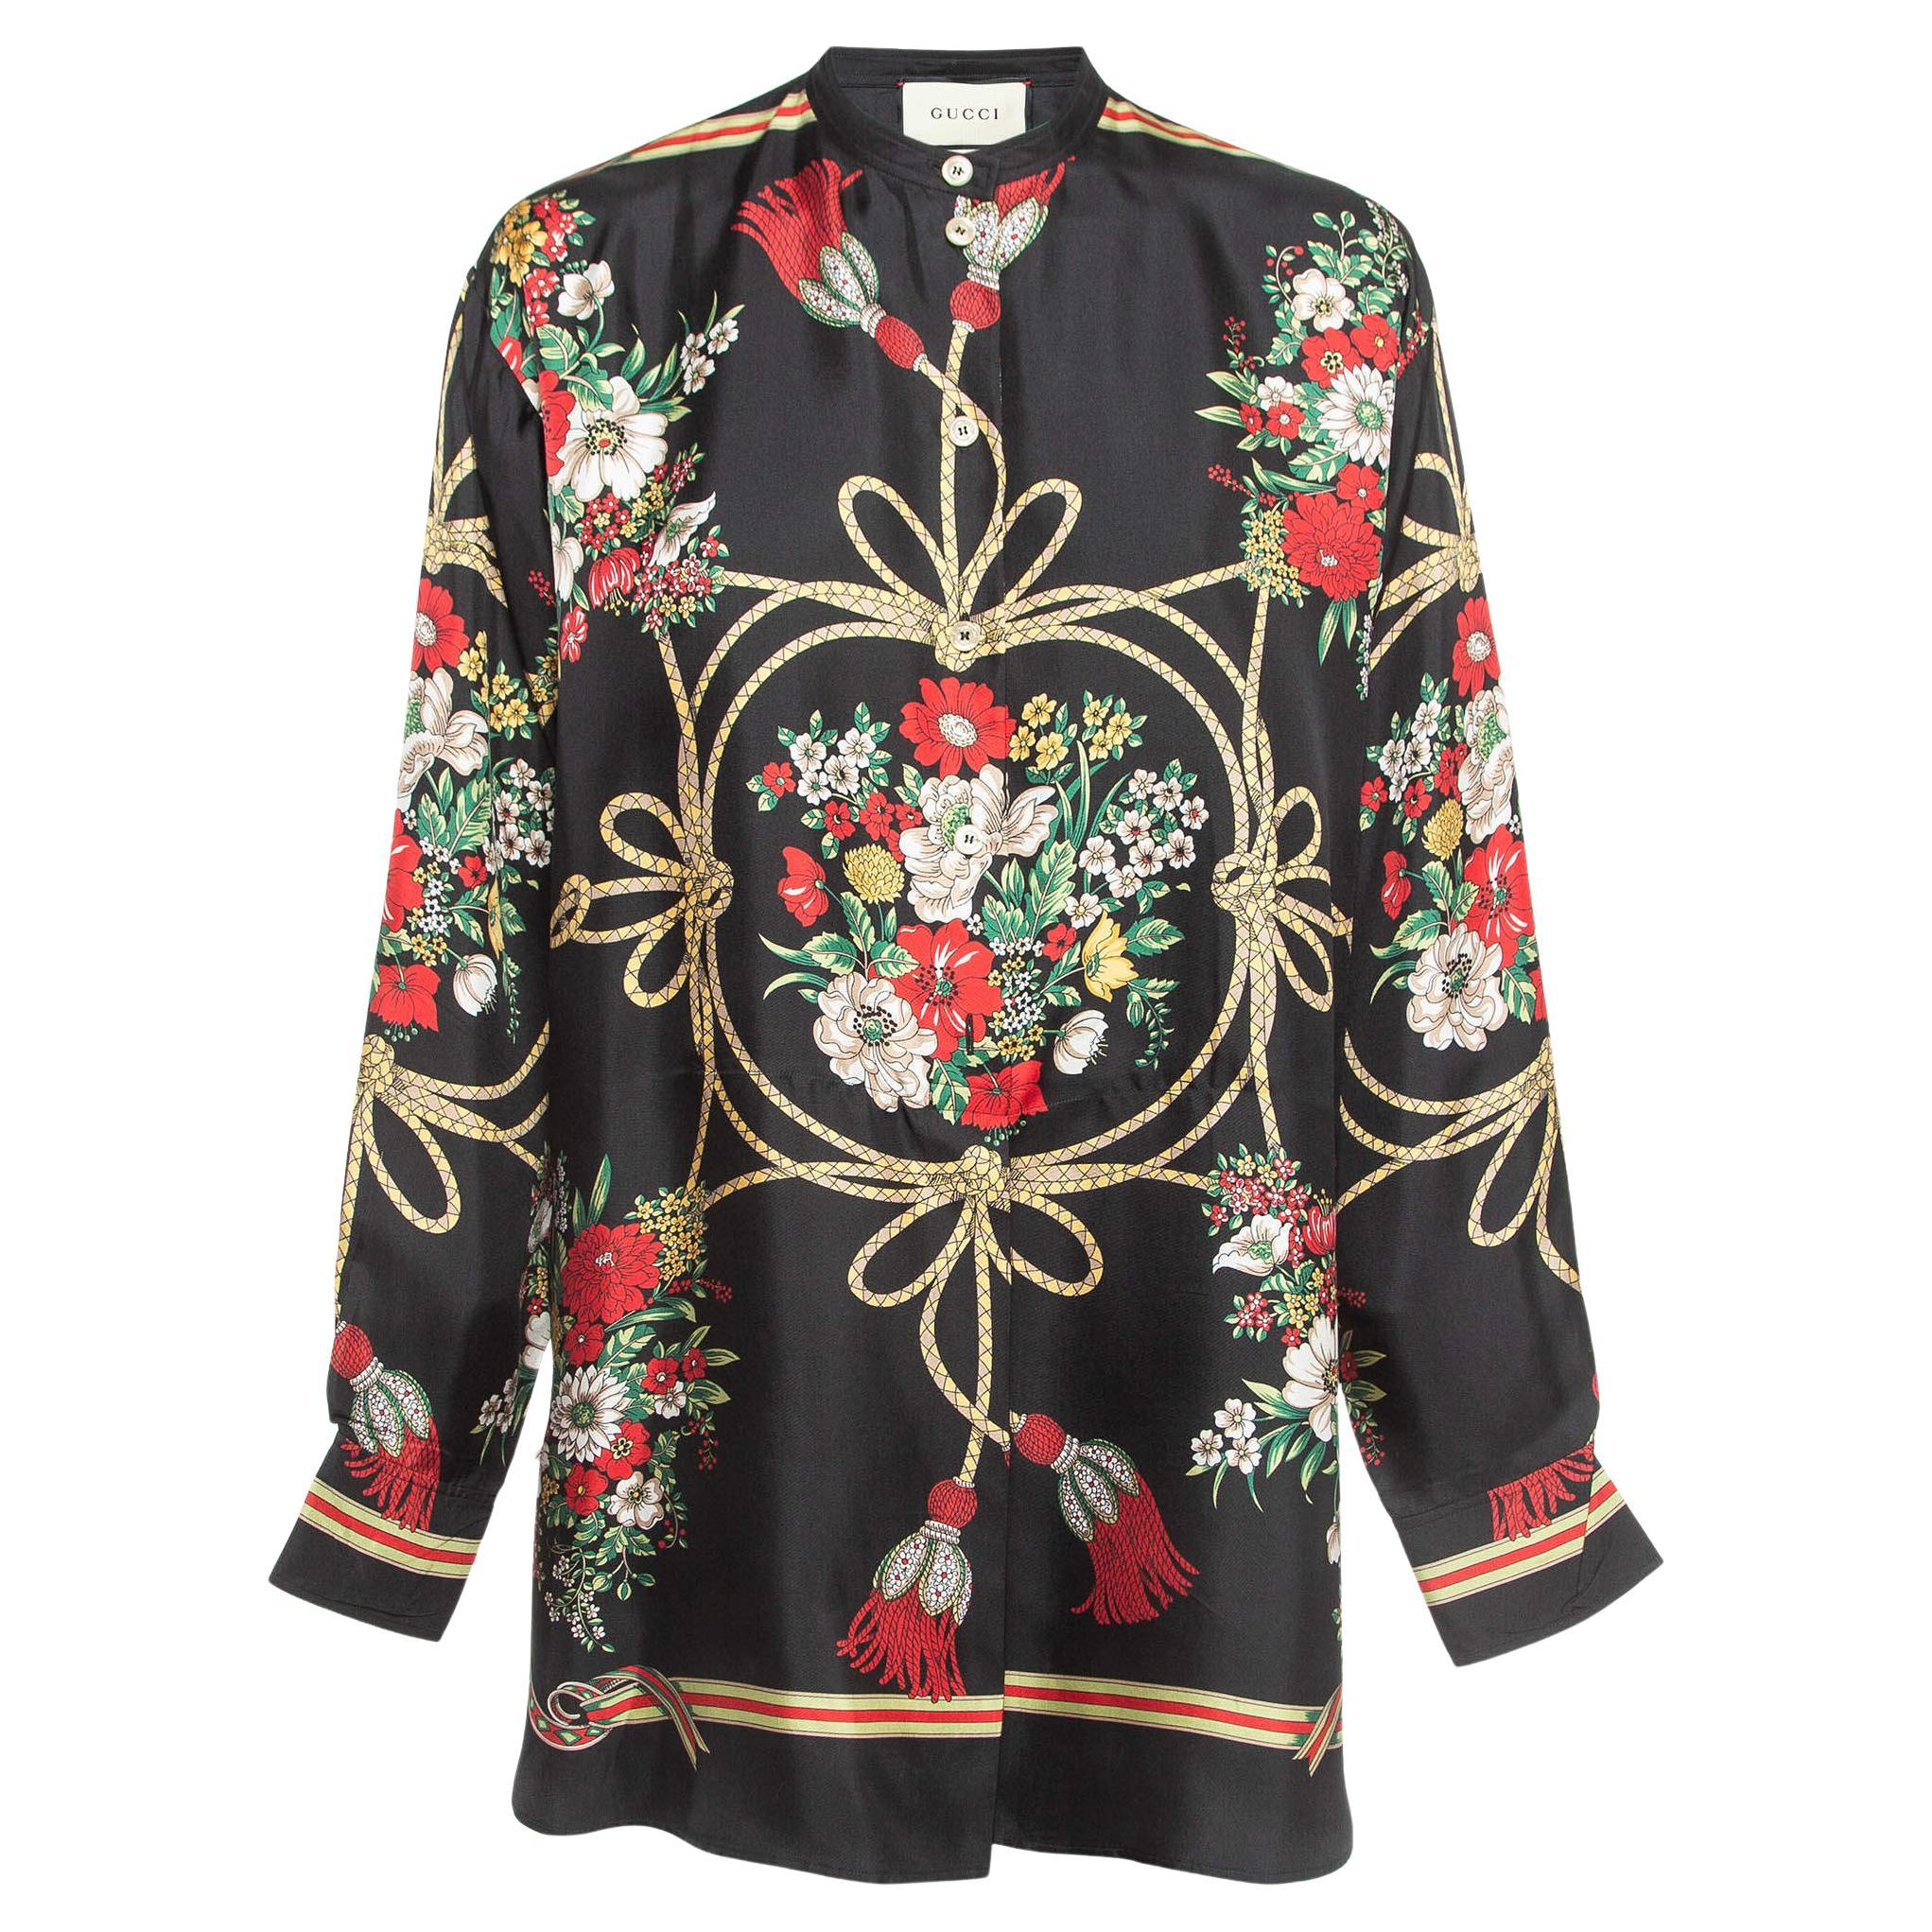 Gucci Black Floral Print Silk Twill Oversized Blouse S